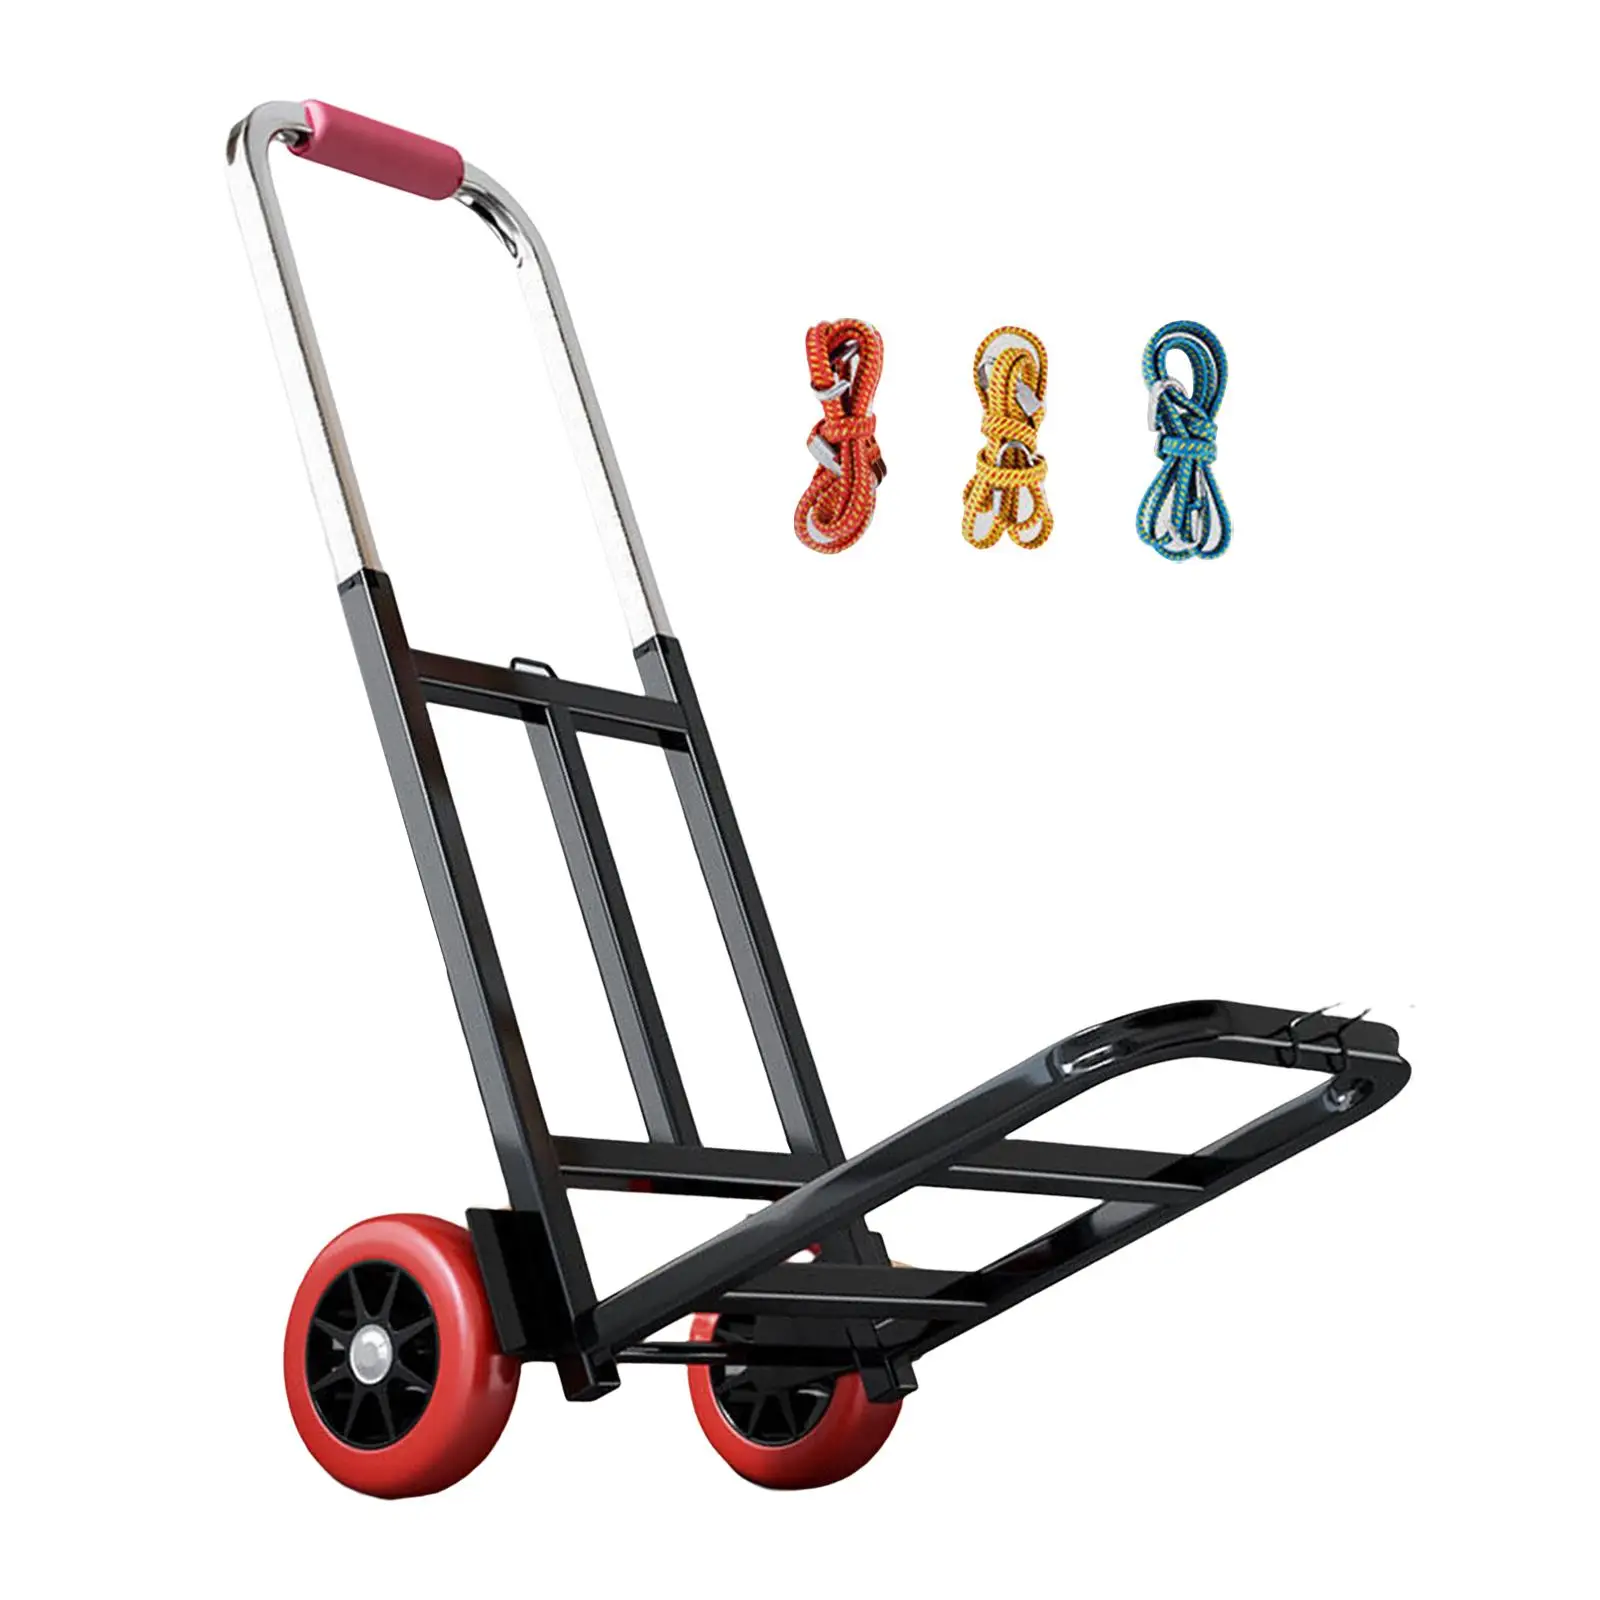 Folding Hand Truck Portable Compact Rubber Wheels Luggage Trolley Cart Max 154lb for Outdoor Shopping Moving Traveling Grocery